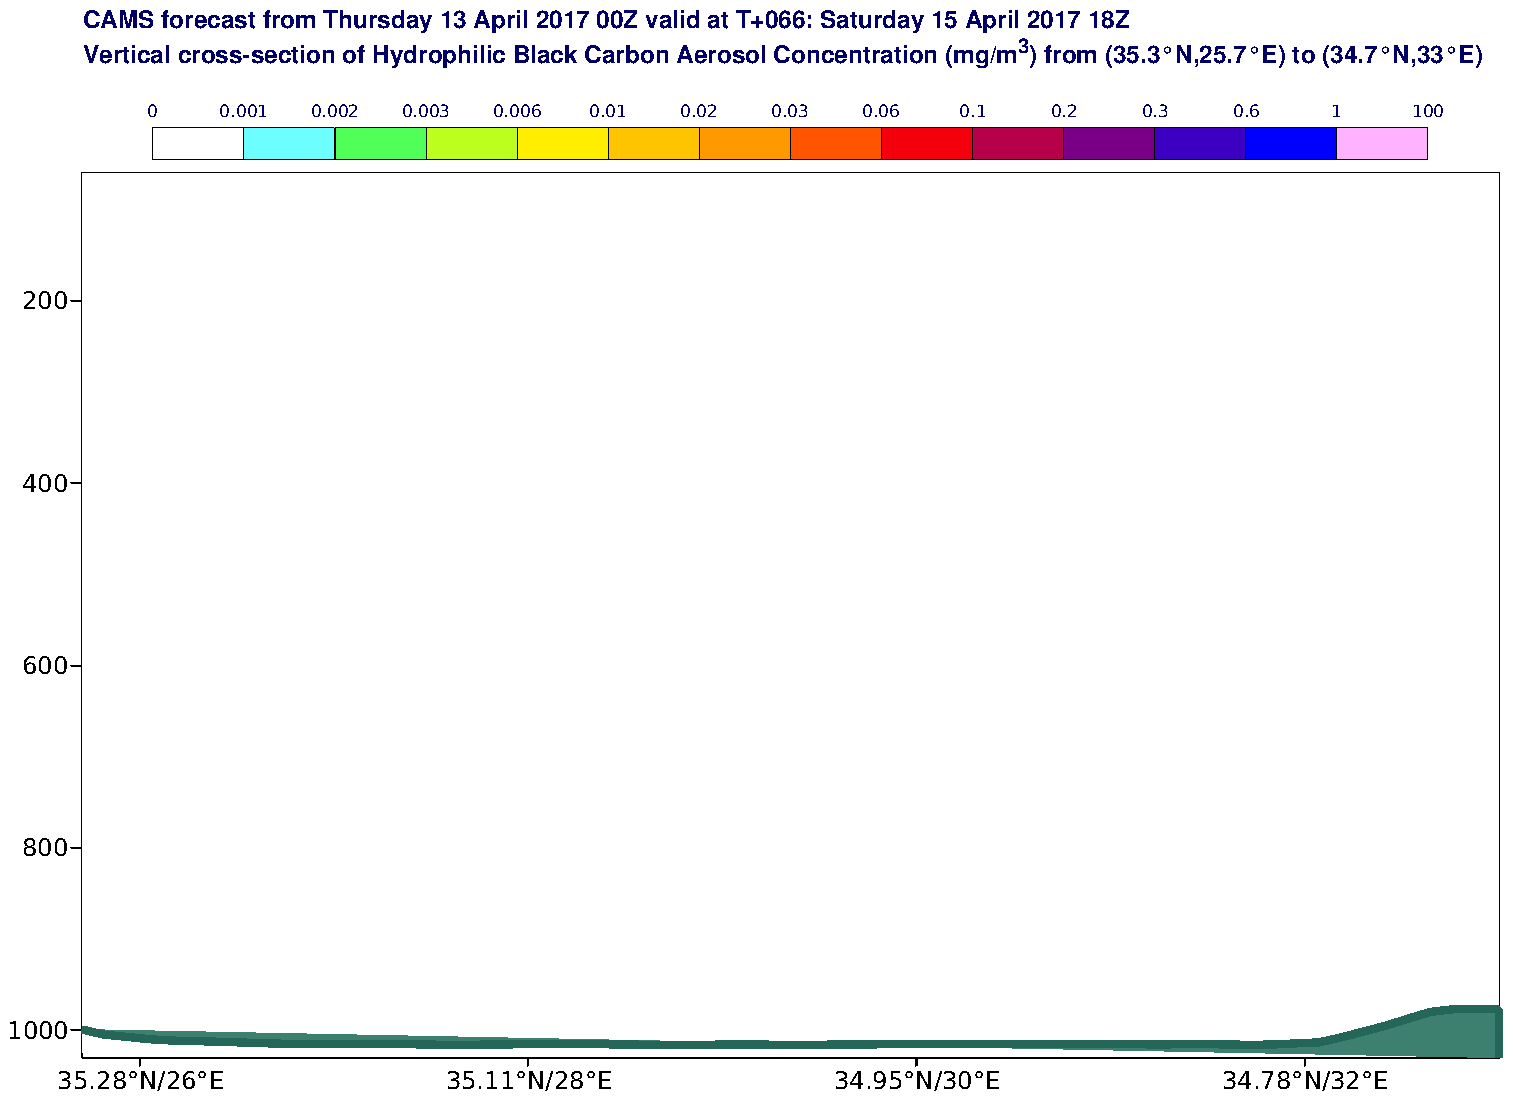 Vertical cross-section of Hydrophilic Black Carbon Aerosol Concentration (mg/m3) valid at T66 - 2017-04-15 18:00